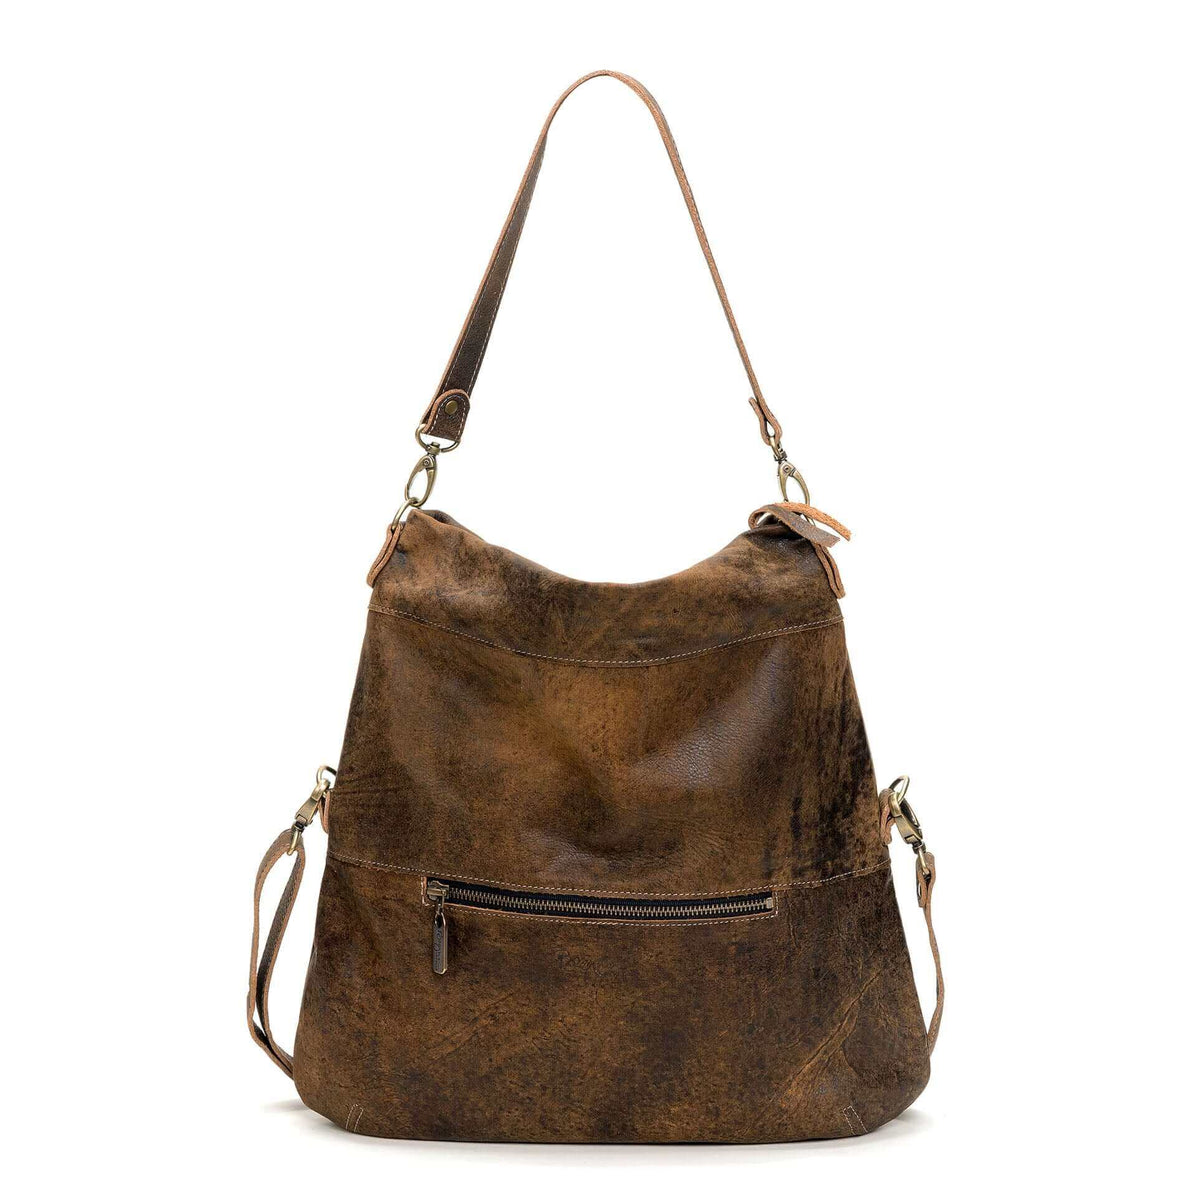 Bomber Brown 6-in-1 leather crossbody backpack - Brynn Capella, USA